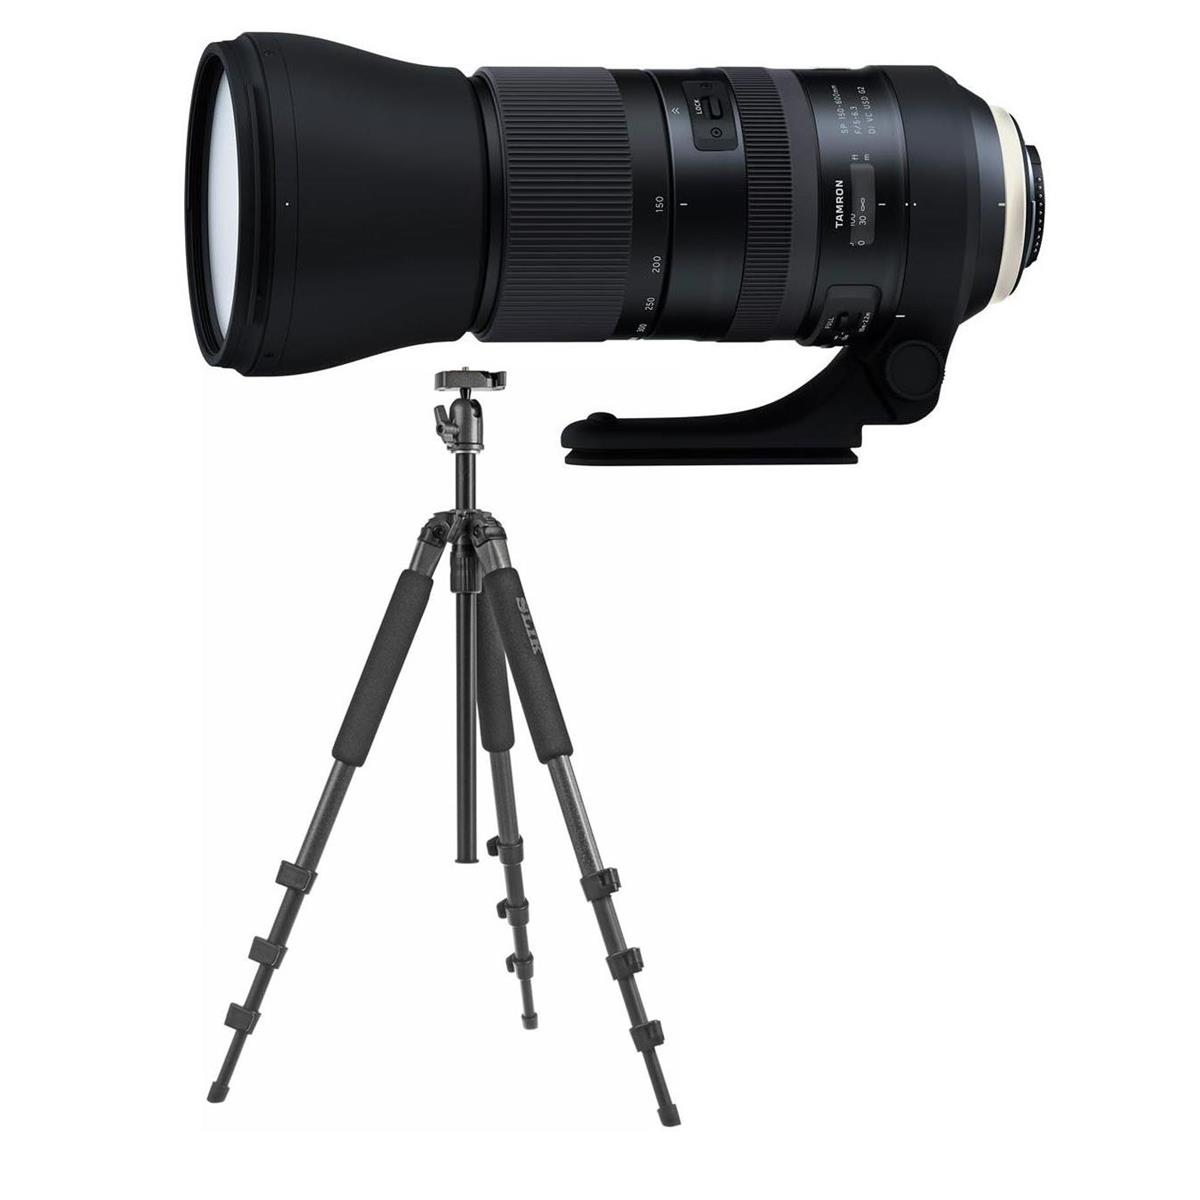 Tamron SP 150-600mm f/5-6.3 Di VC USD G2 Lens for Canon EF with Tripod Kit -  AFA022C-700 T